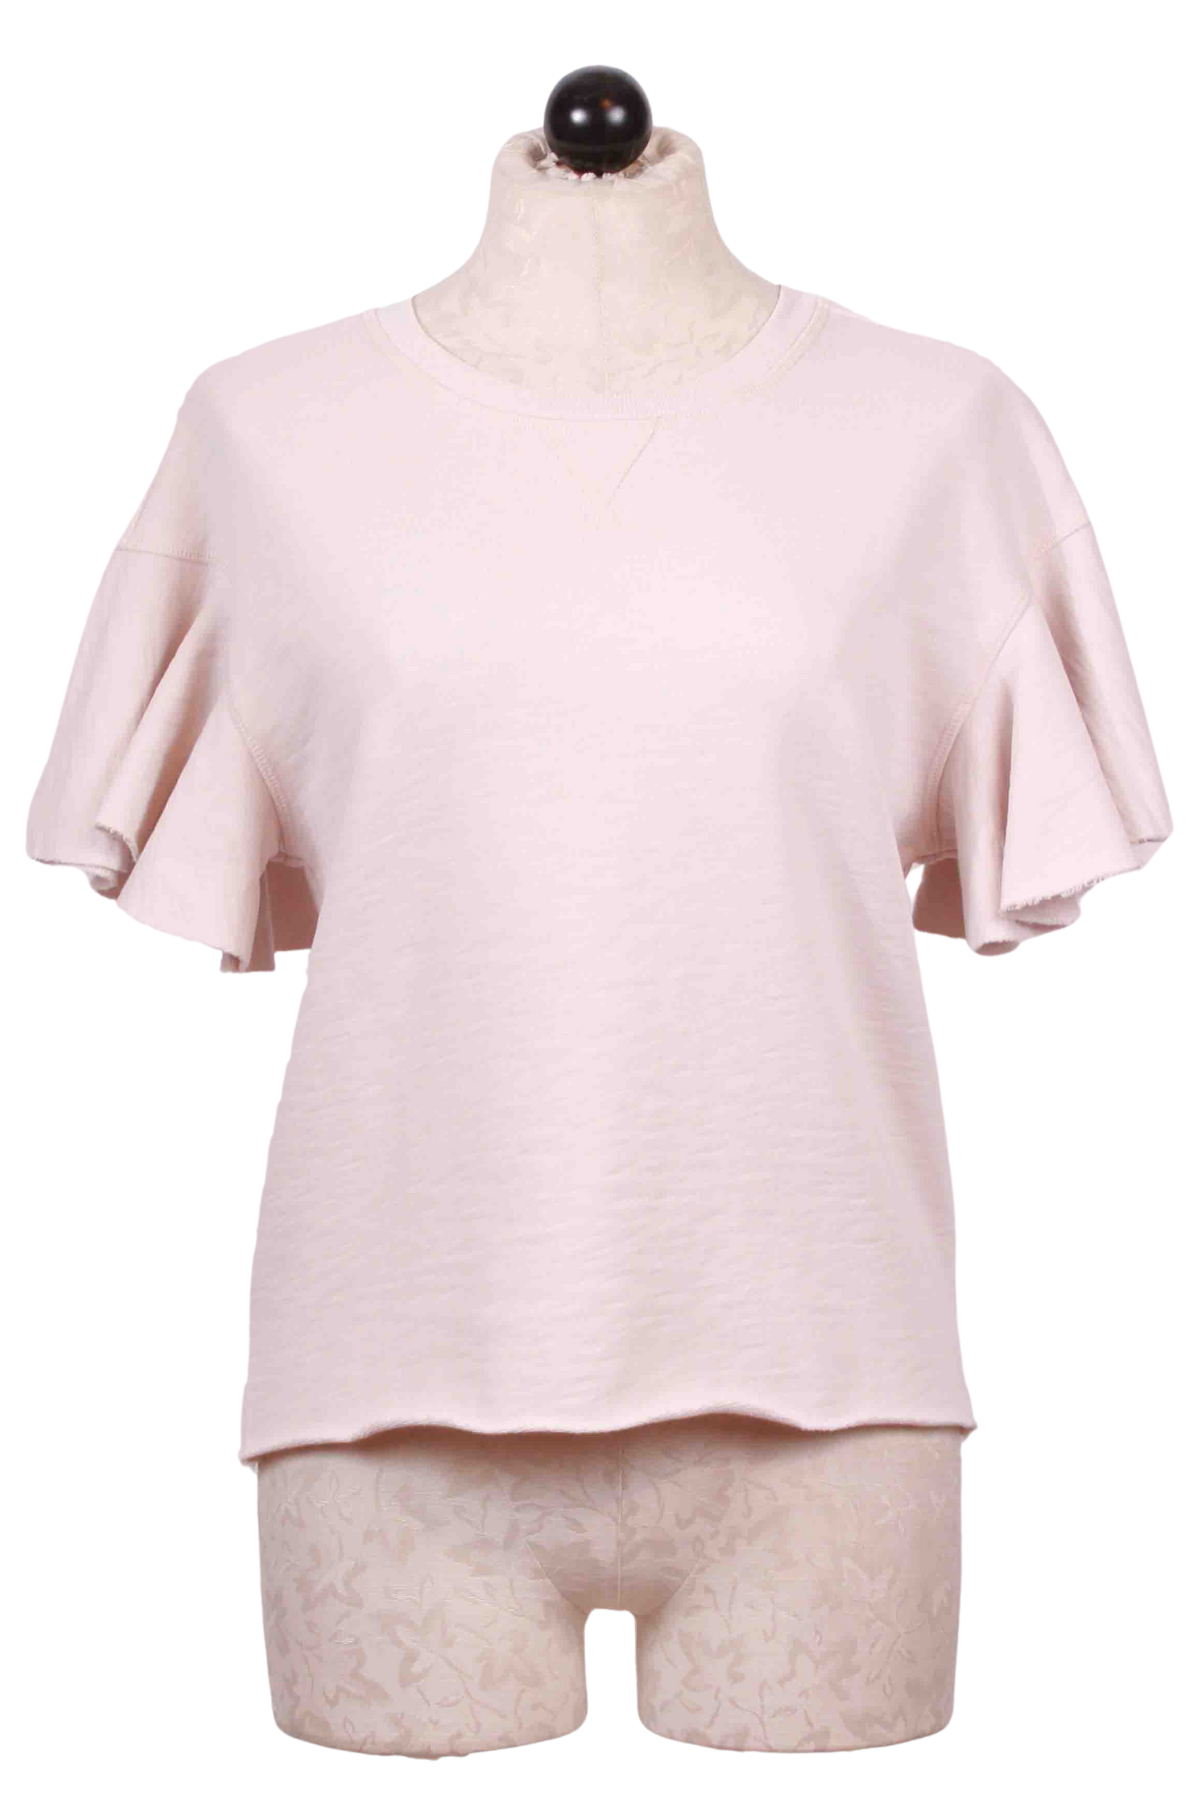 White Sand Big Ruffle Sleeve Melrose Top by Goldie LeWinter